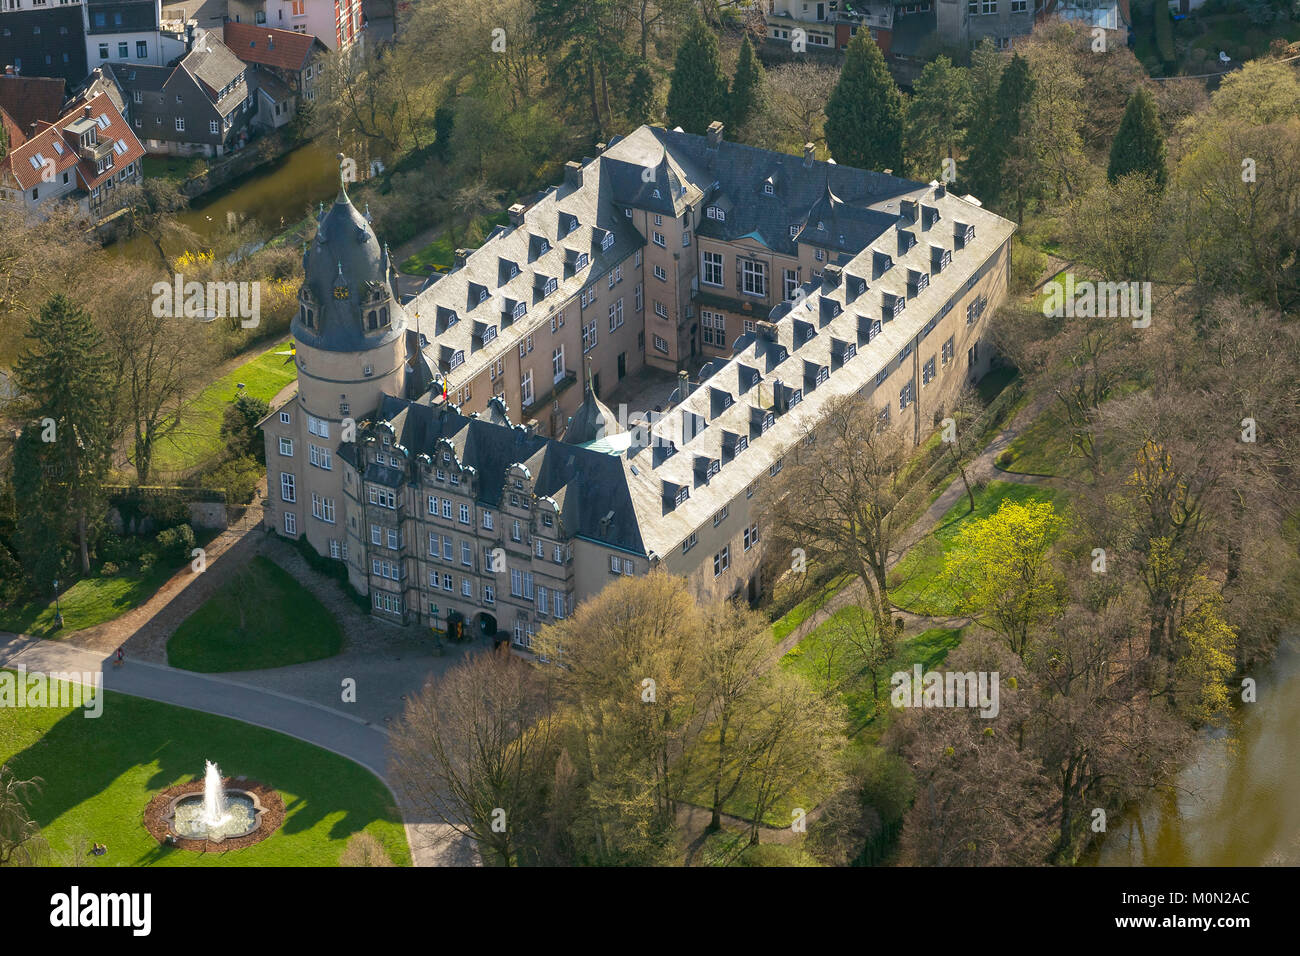 Princely Residenzschloss Detmold on the castle street, forces, moated castle, aerial photo of Detmold, Detmold, North Rhine-Westphalia, Germany, Europ Stock Photo